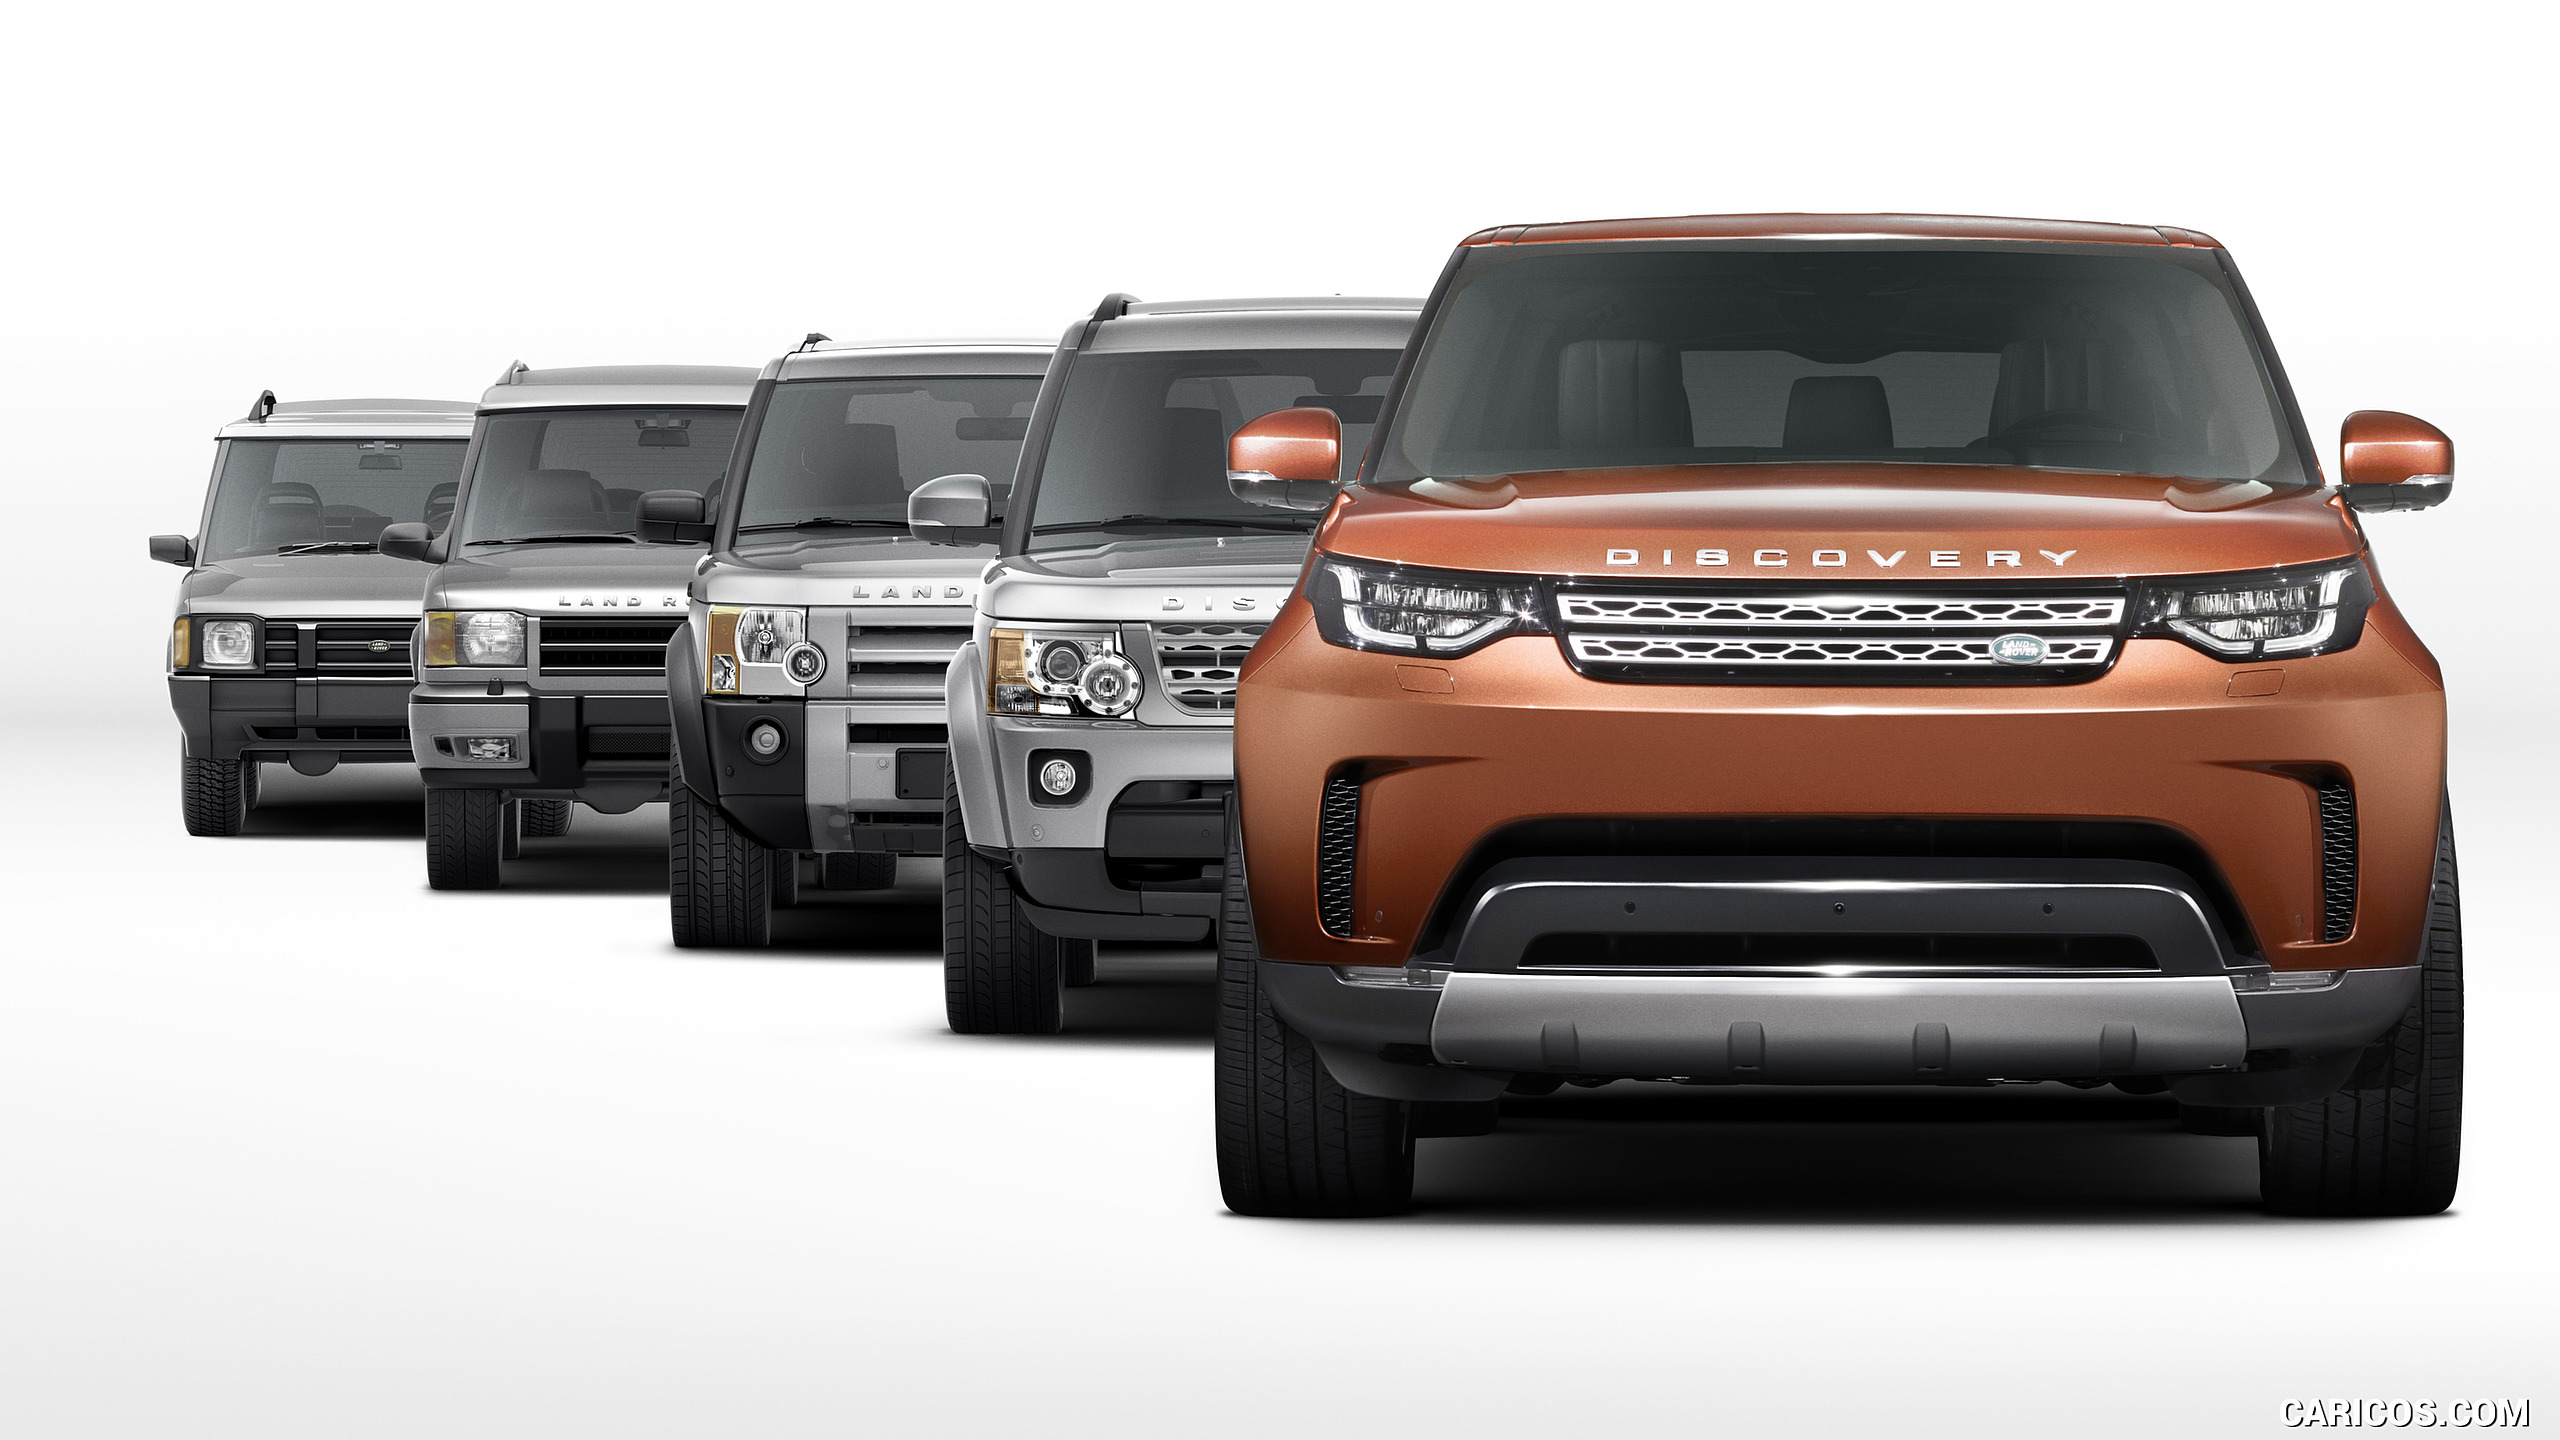 2018_land_rover_discovery_2_2560x1440.jpg